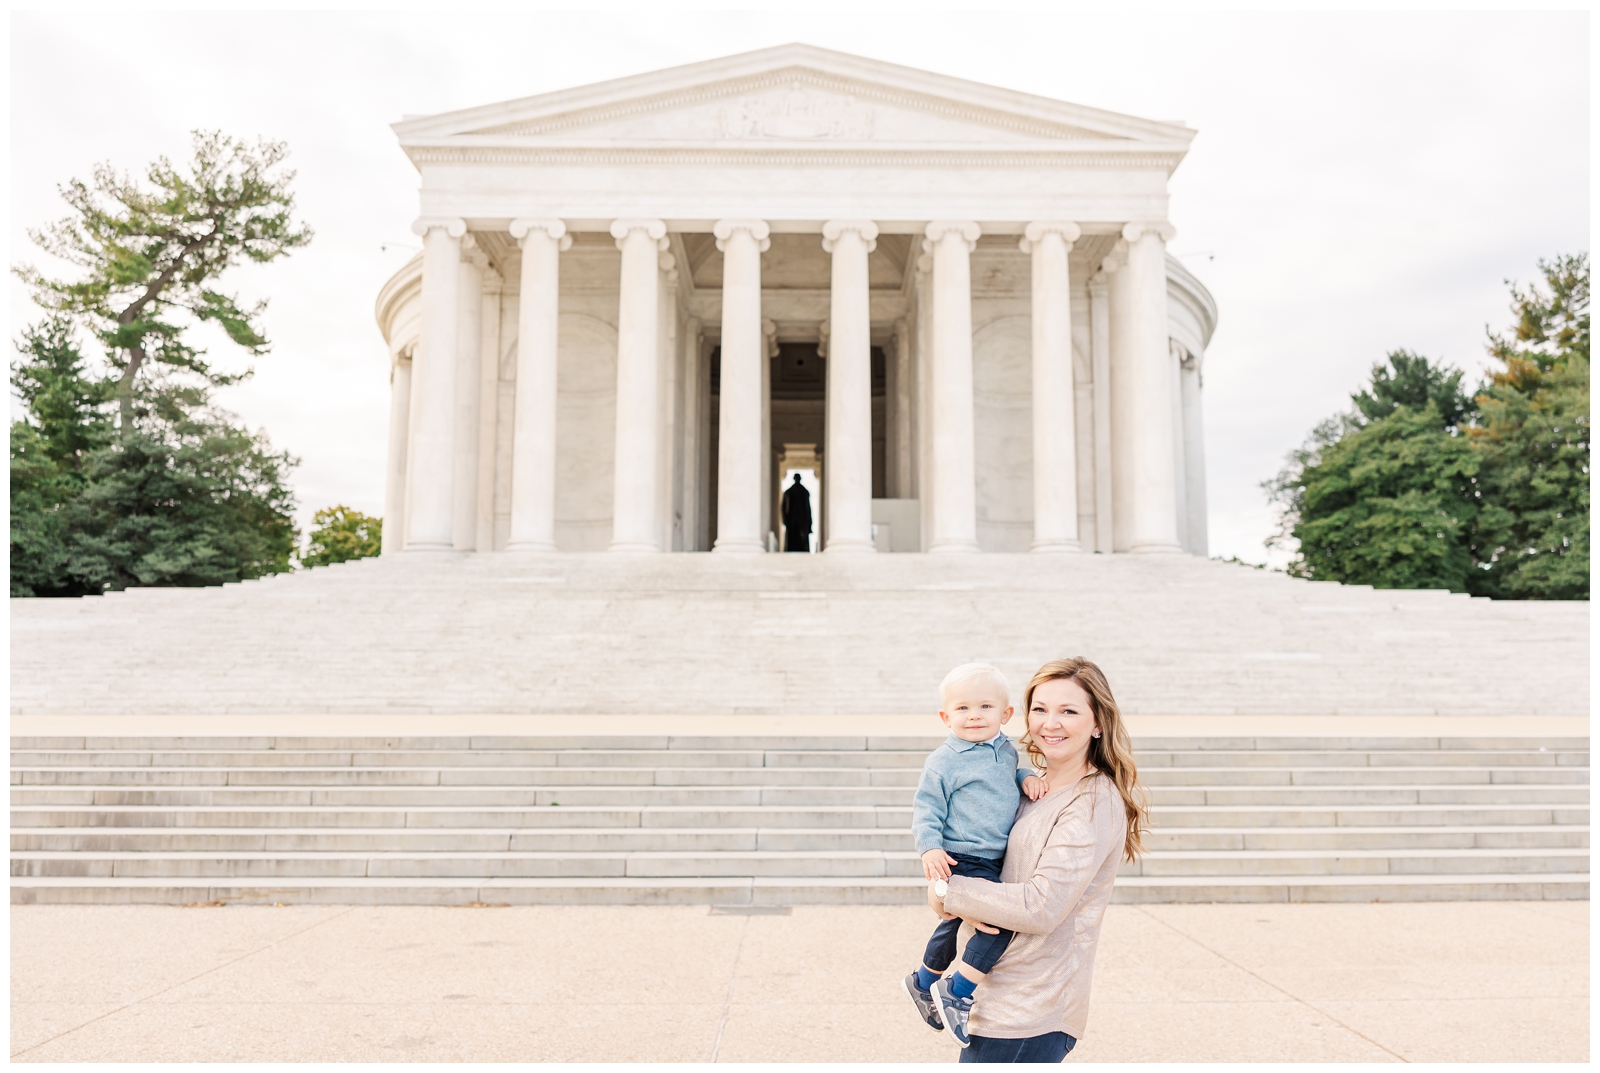 Mom and son in front of the Jefferson Memorial